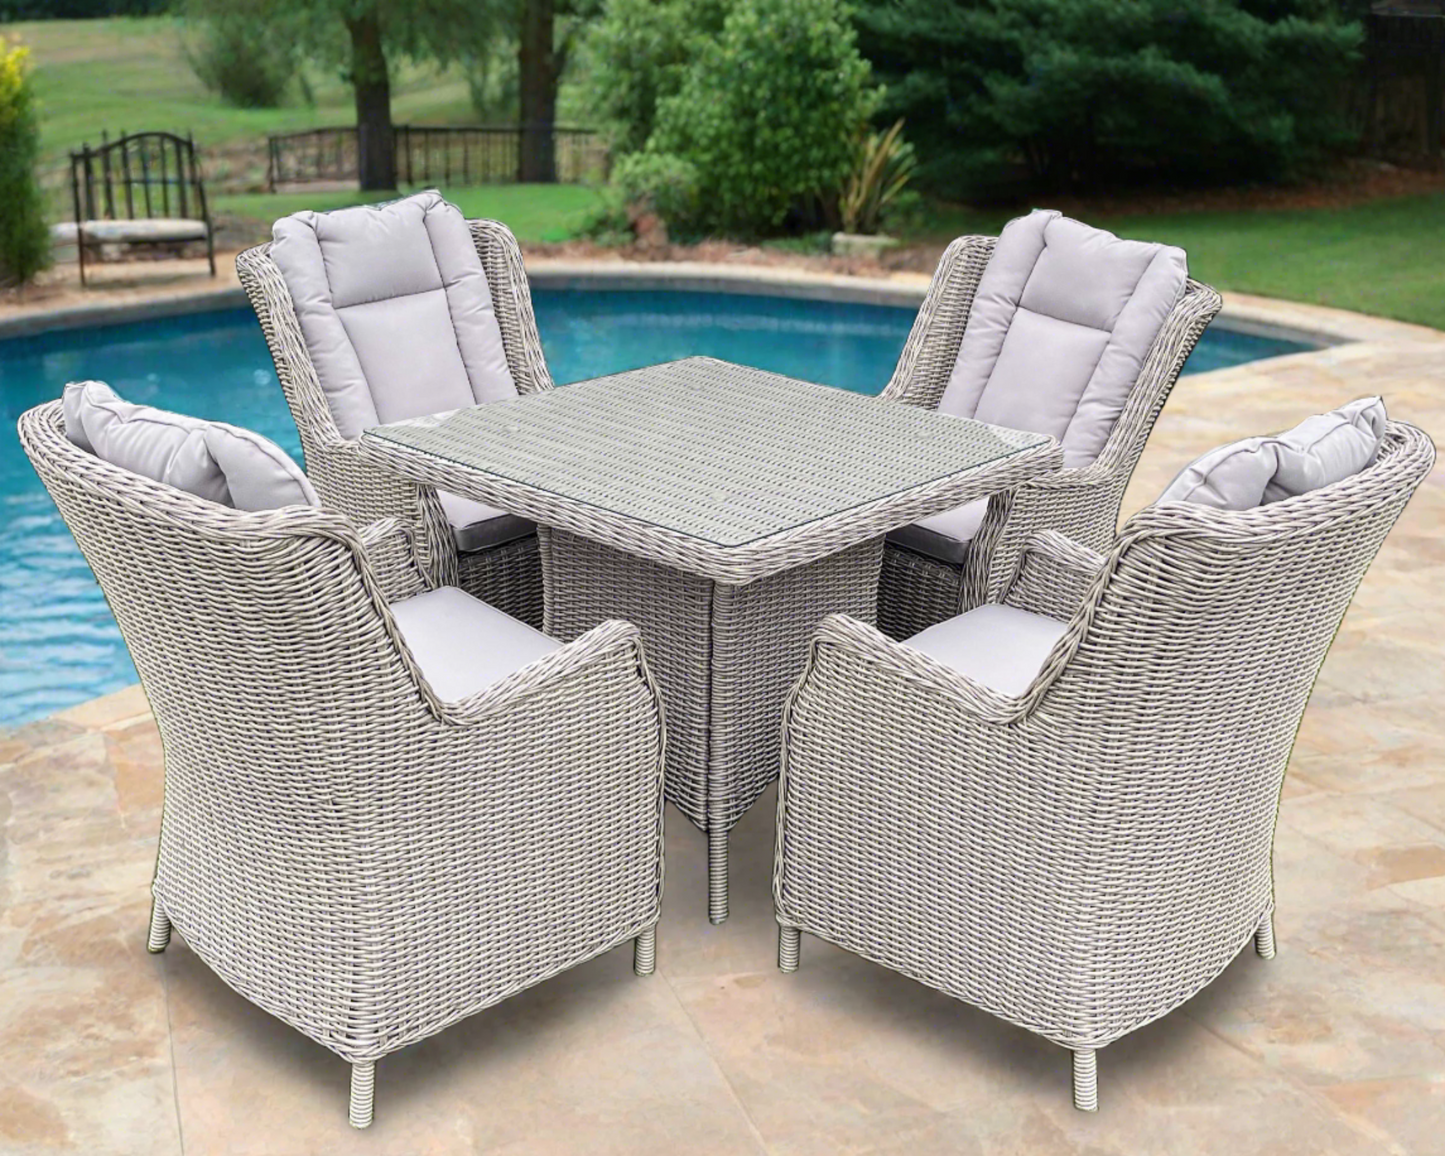 ADDA 5-Piece Set Outdoor Wicker 4 Seat Dining Table Chair - Grey